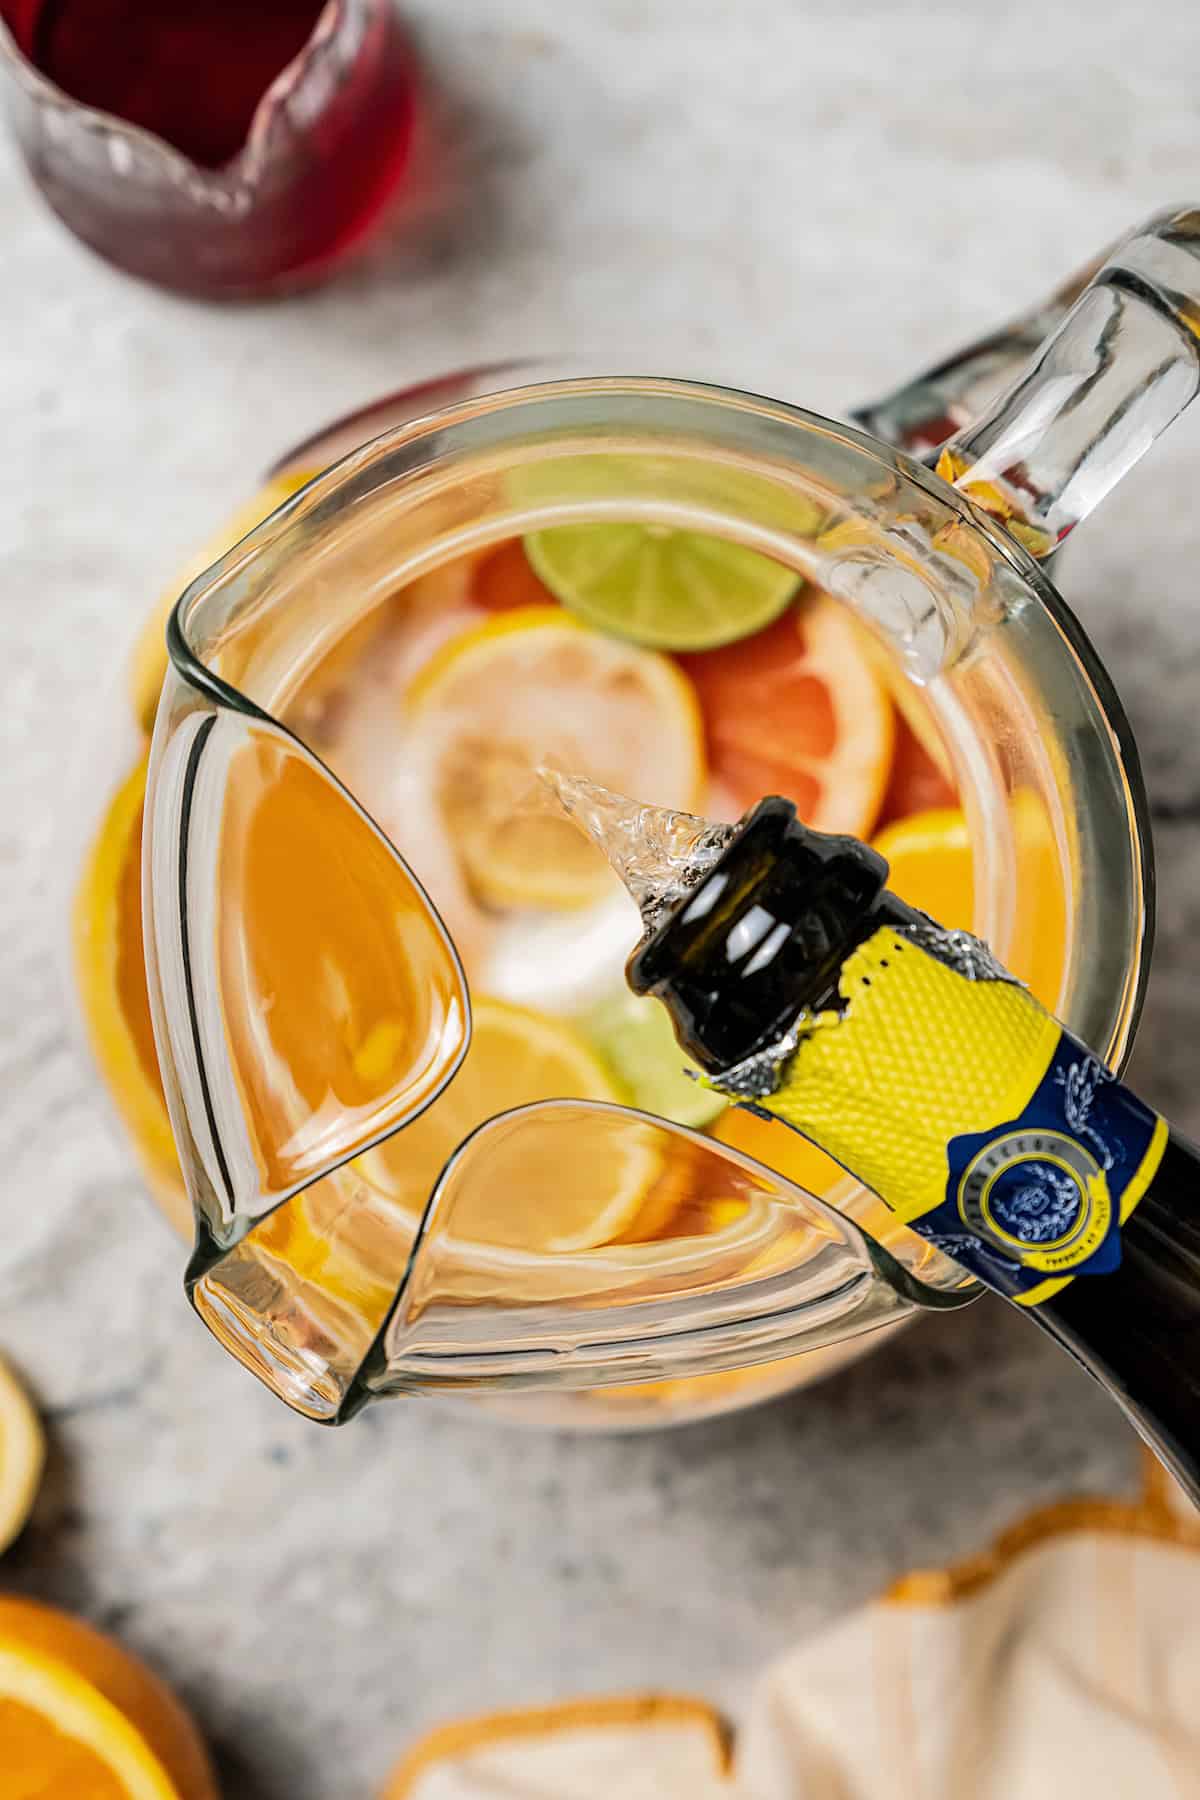 Overhead view of prosecco being poured from the bottle into a pitcher filled with sliced citrus.